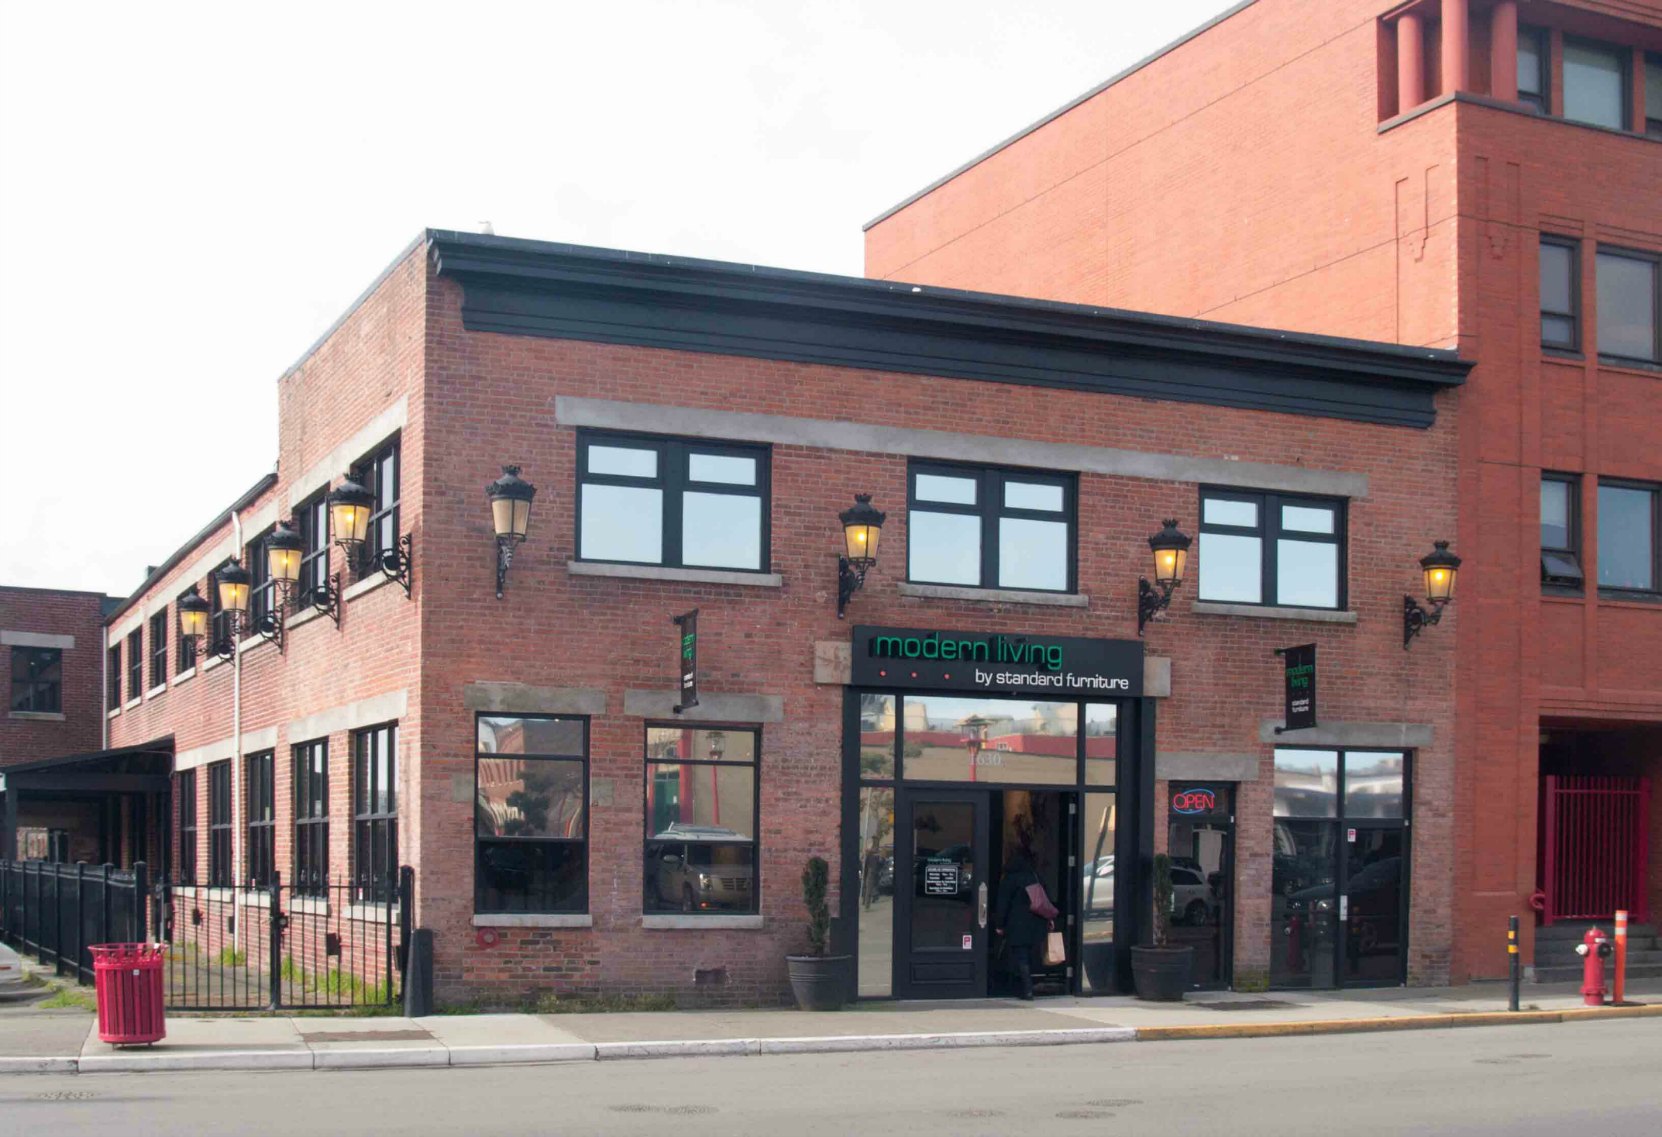 This building at 1630 Store Street was built in 1912 as a machine shop.